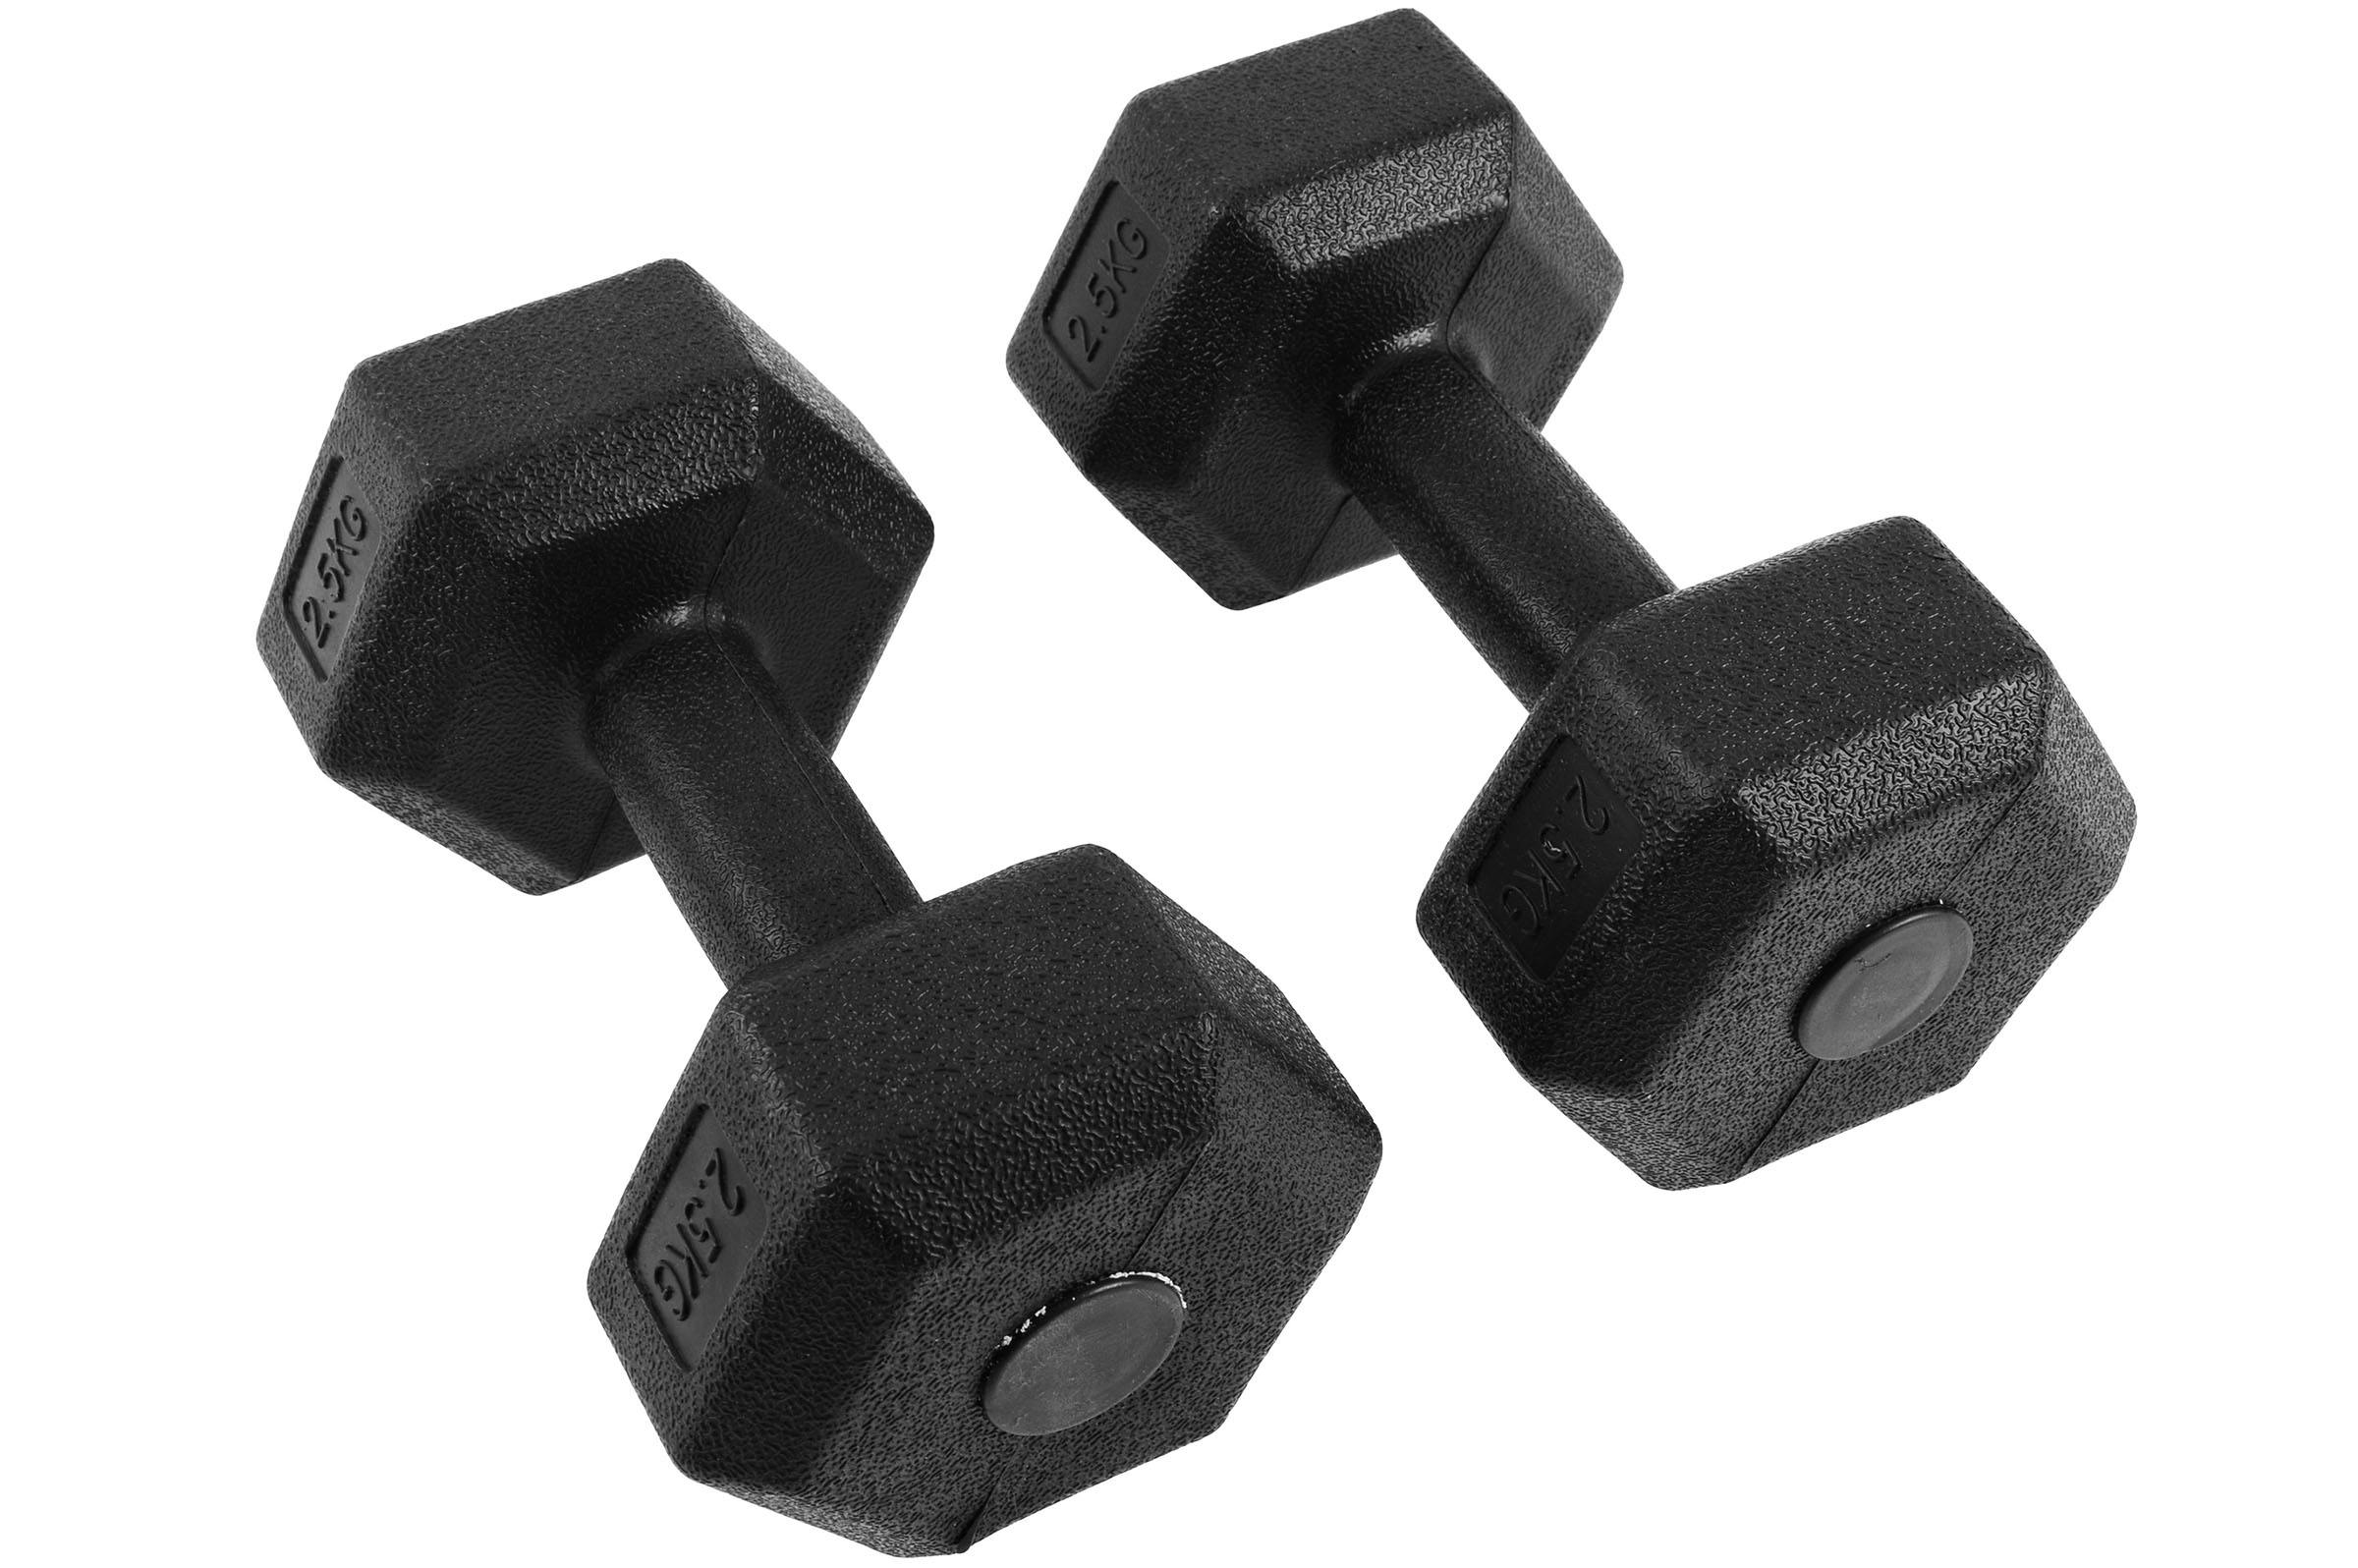 ADJUSTABLE DUMBBELLS, FROM 2.5 TO 24 KILOS, HOME TRAINING, FAST SHIPPING  FROM EUROPE